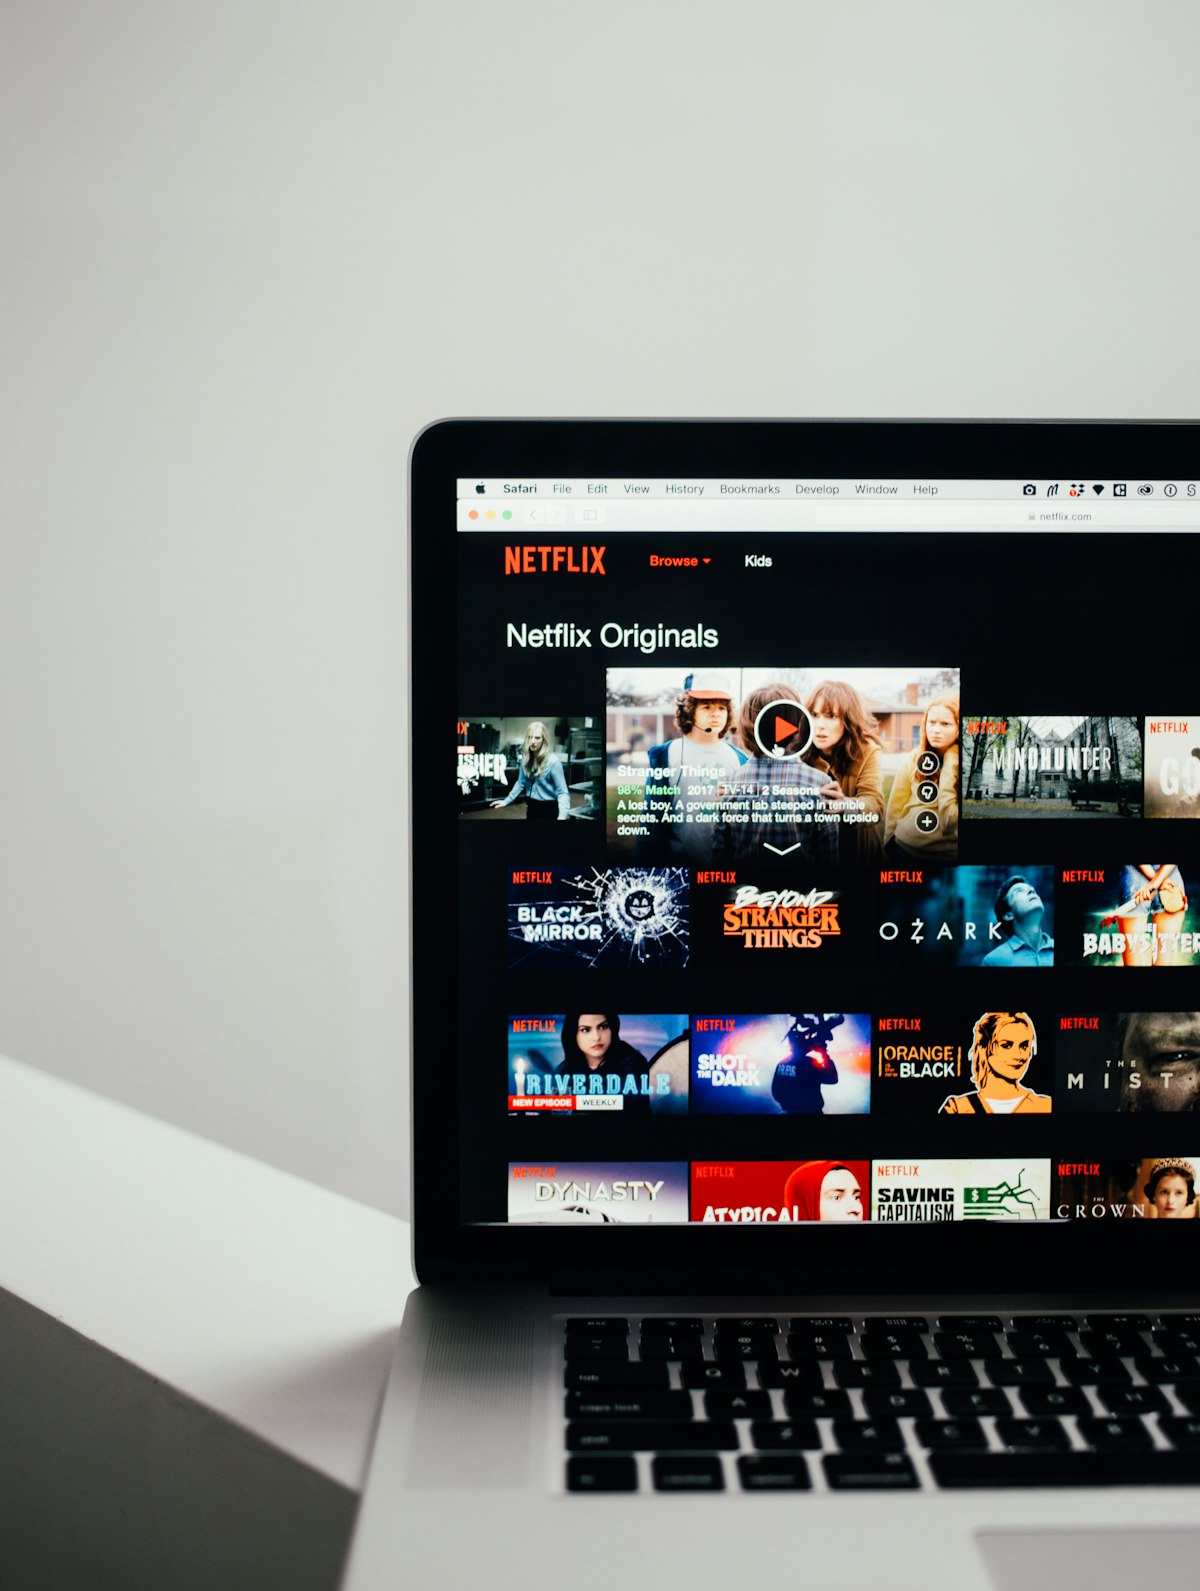 How Netflix Uses Human Curation to Drive Content Search and Discovery